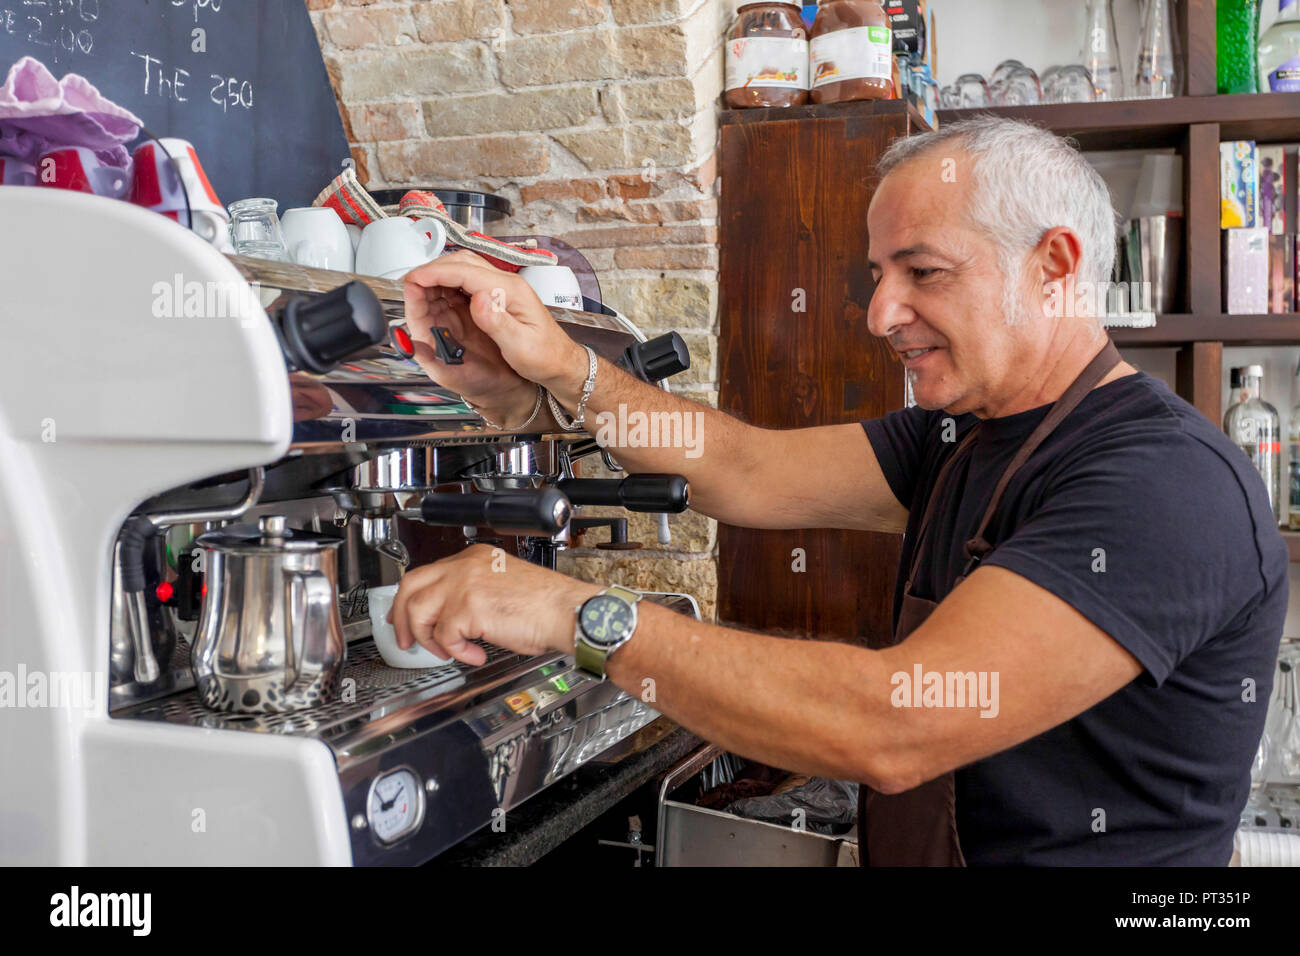 Waiter waiting at espresso machine in an old cafe in Cagliari, Sardinia, Italy Stock Photo